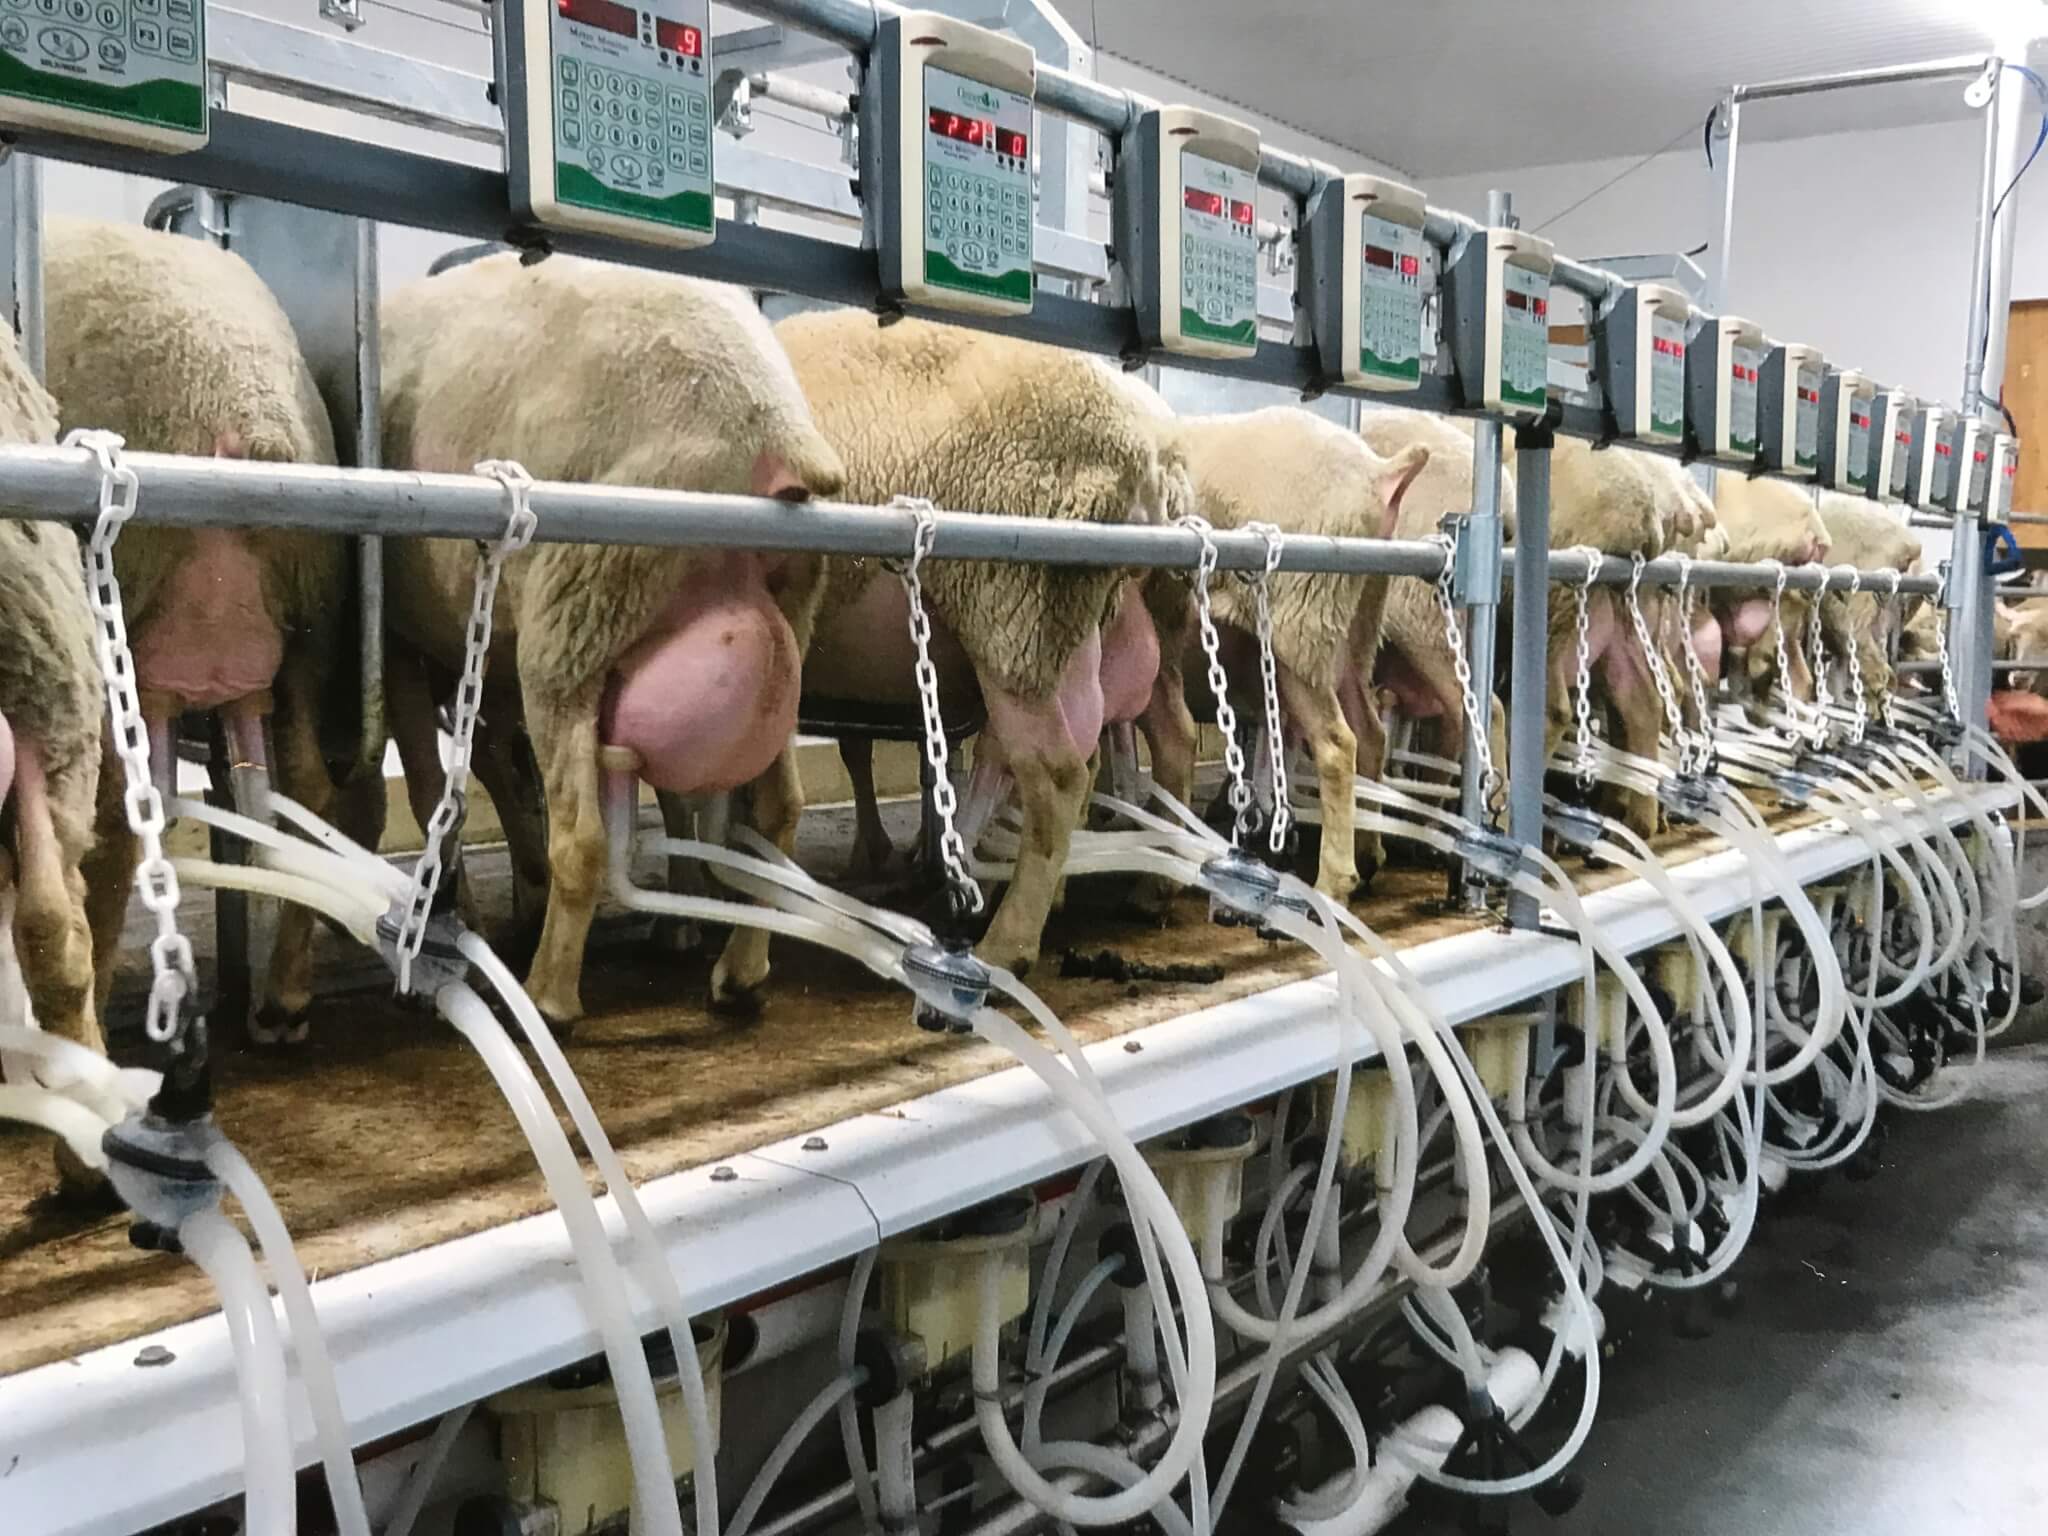 Milking sheep in parlor